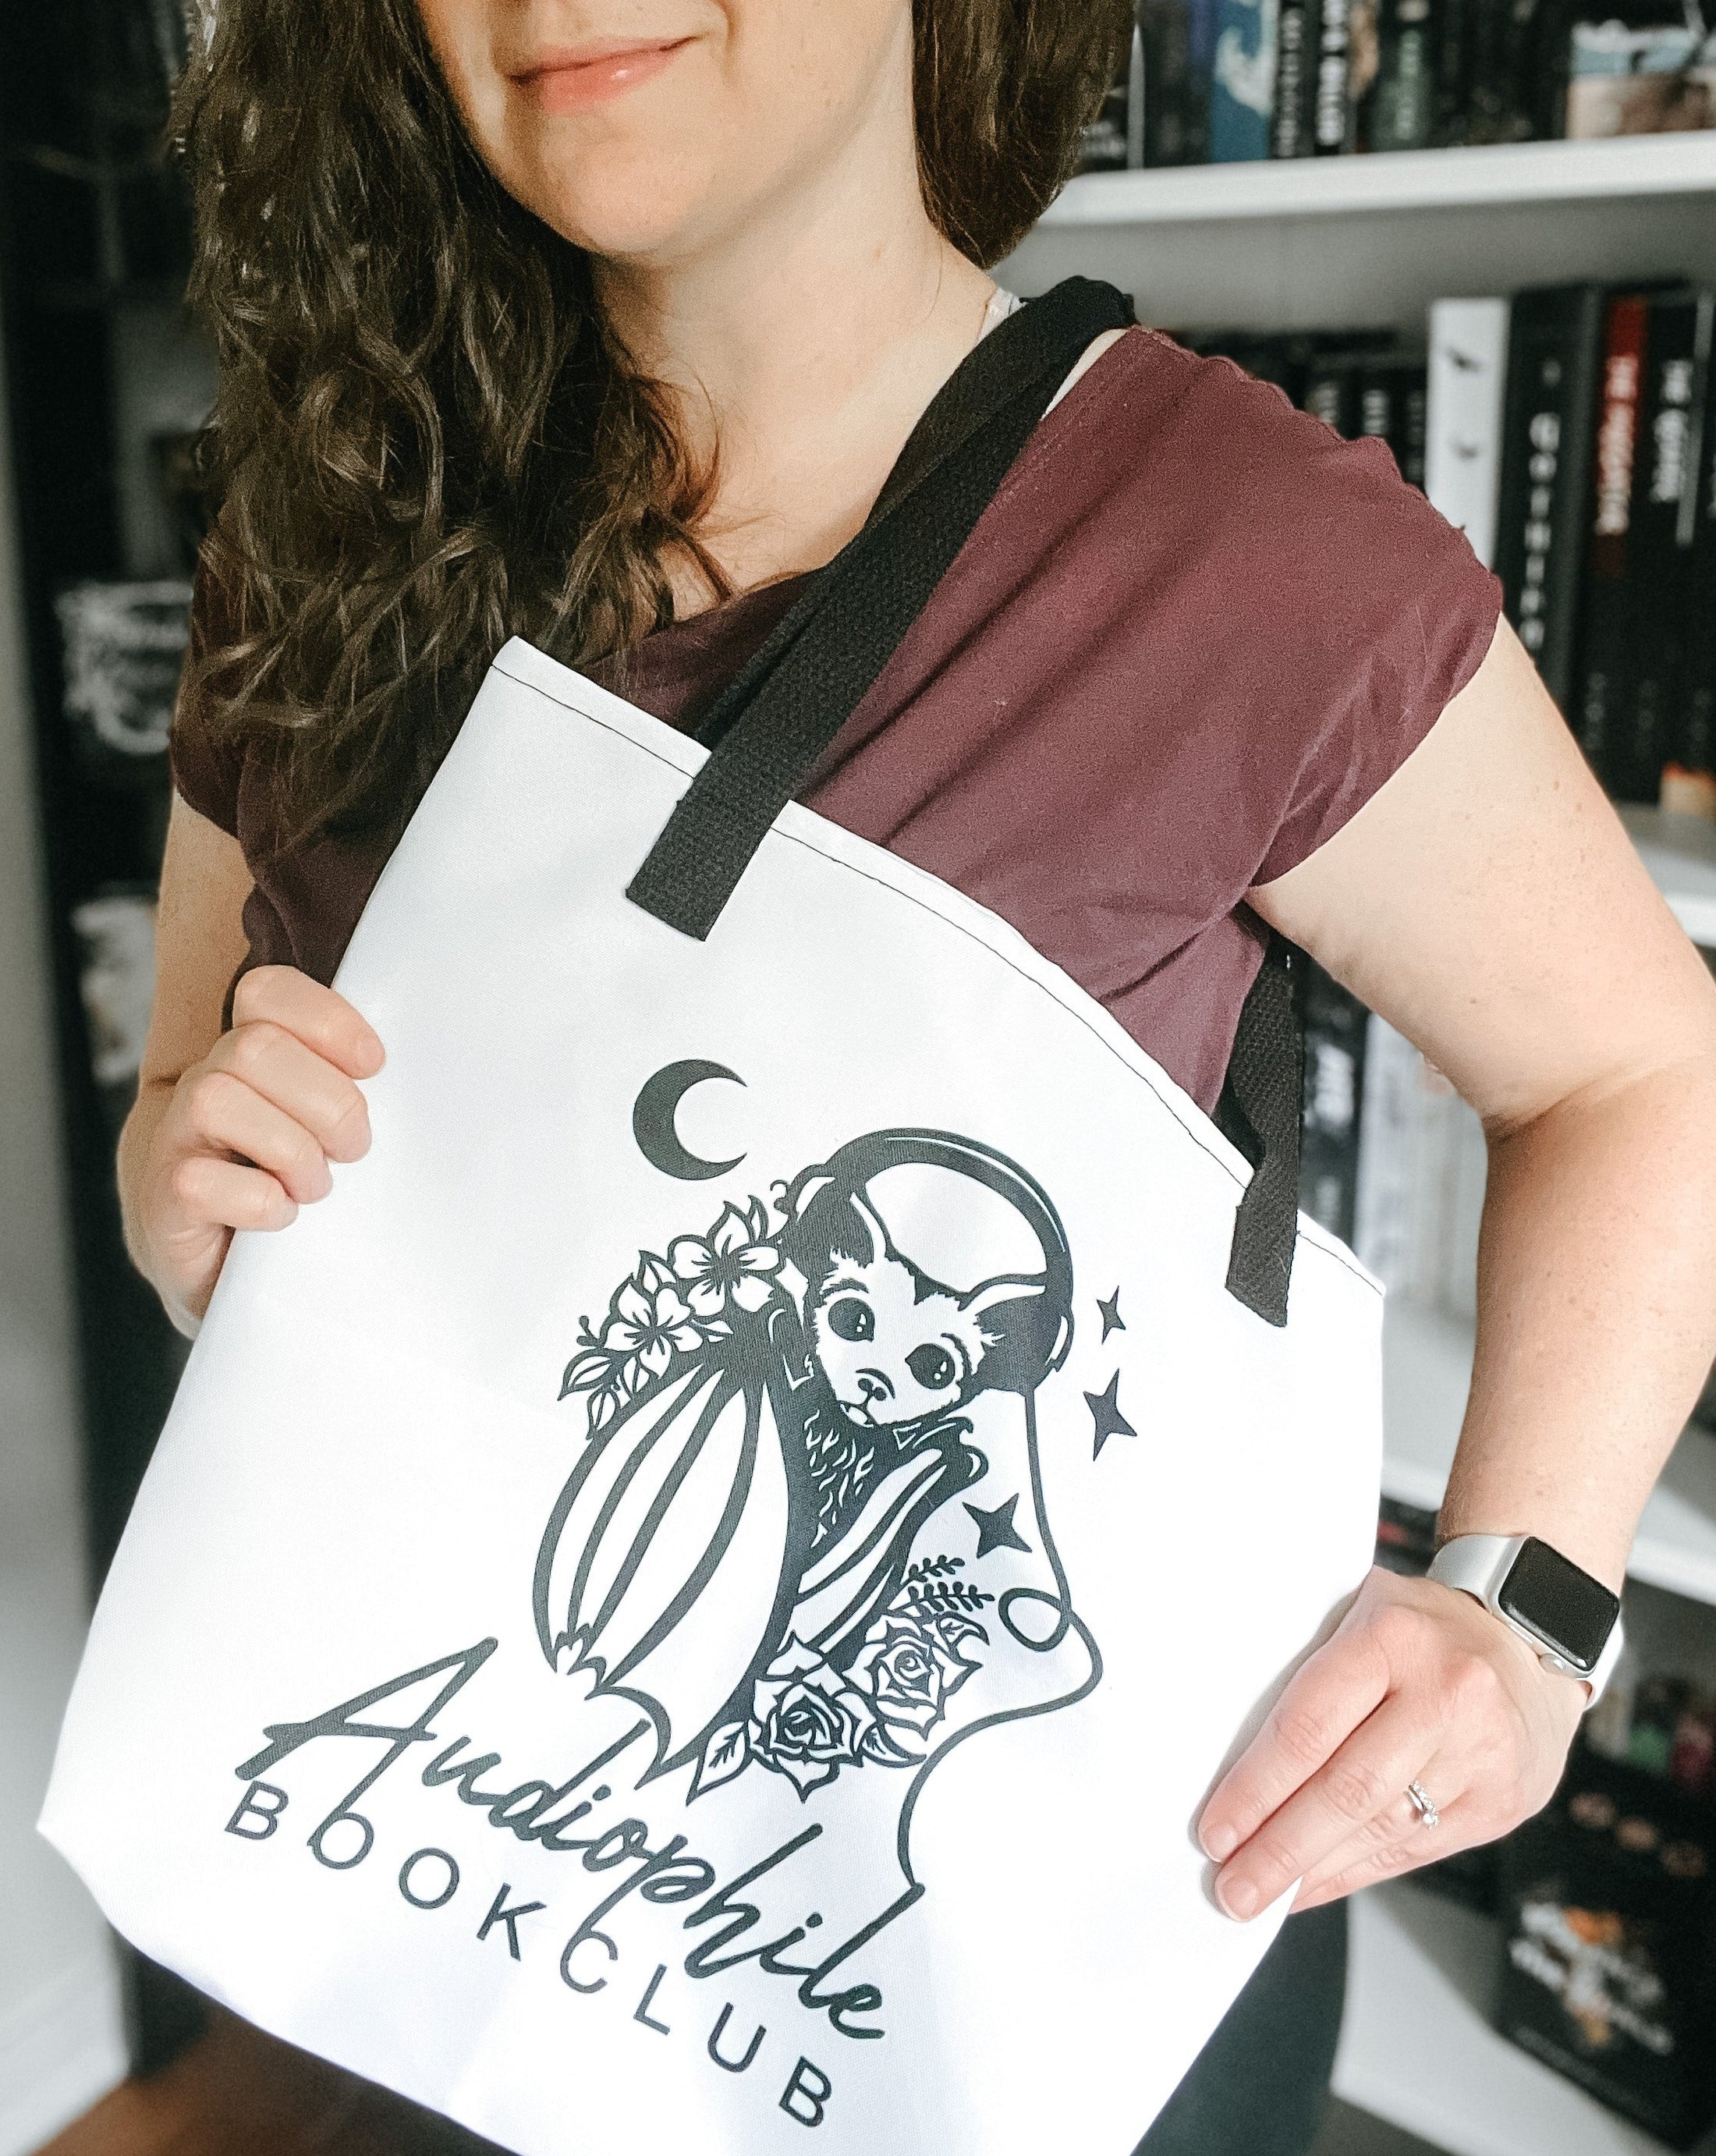 Audiophile Bookclub White Tote Bag from FireDrake Artistry™. Photo by @athousandbookishlives